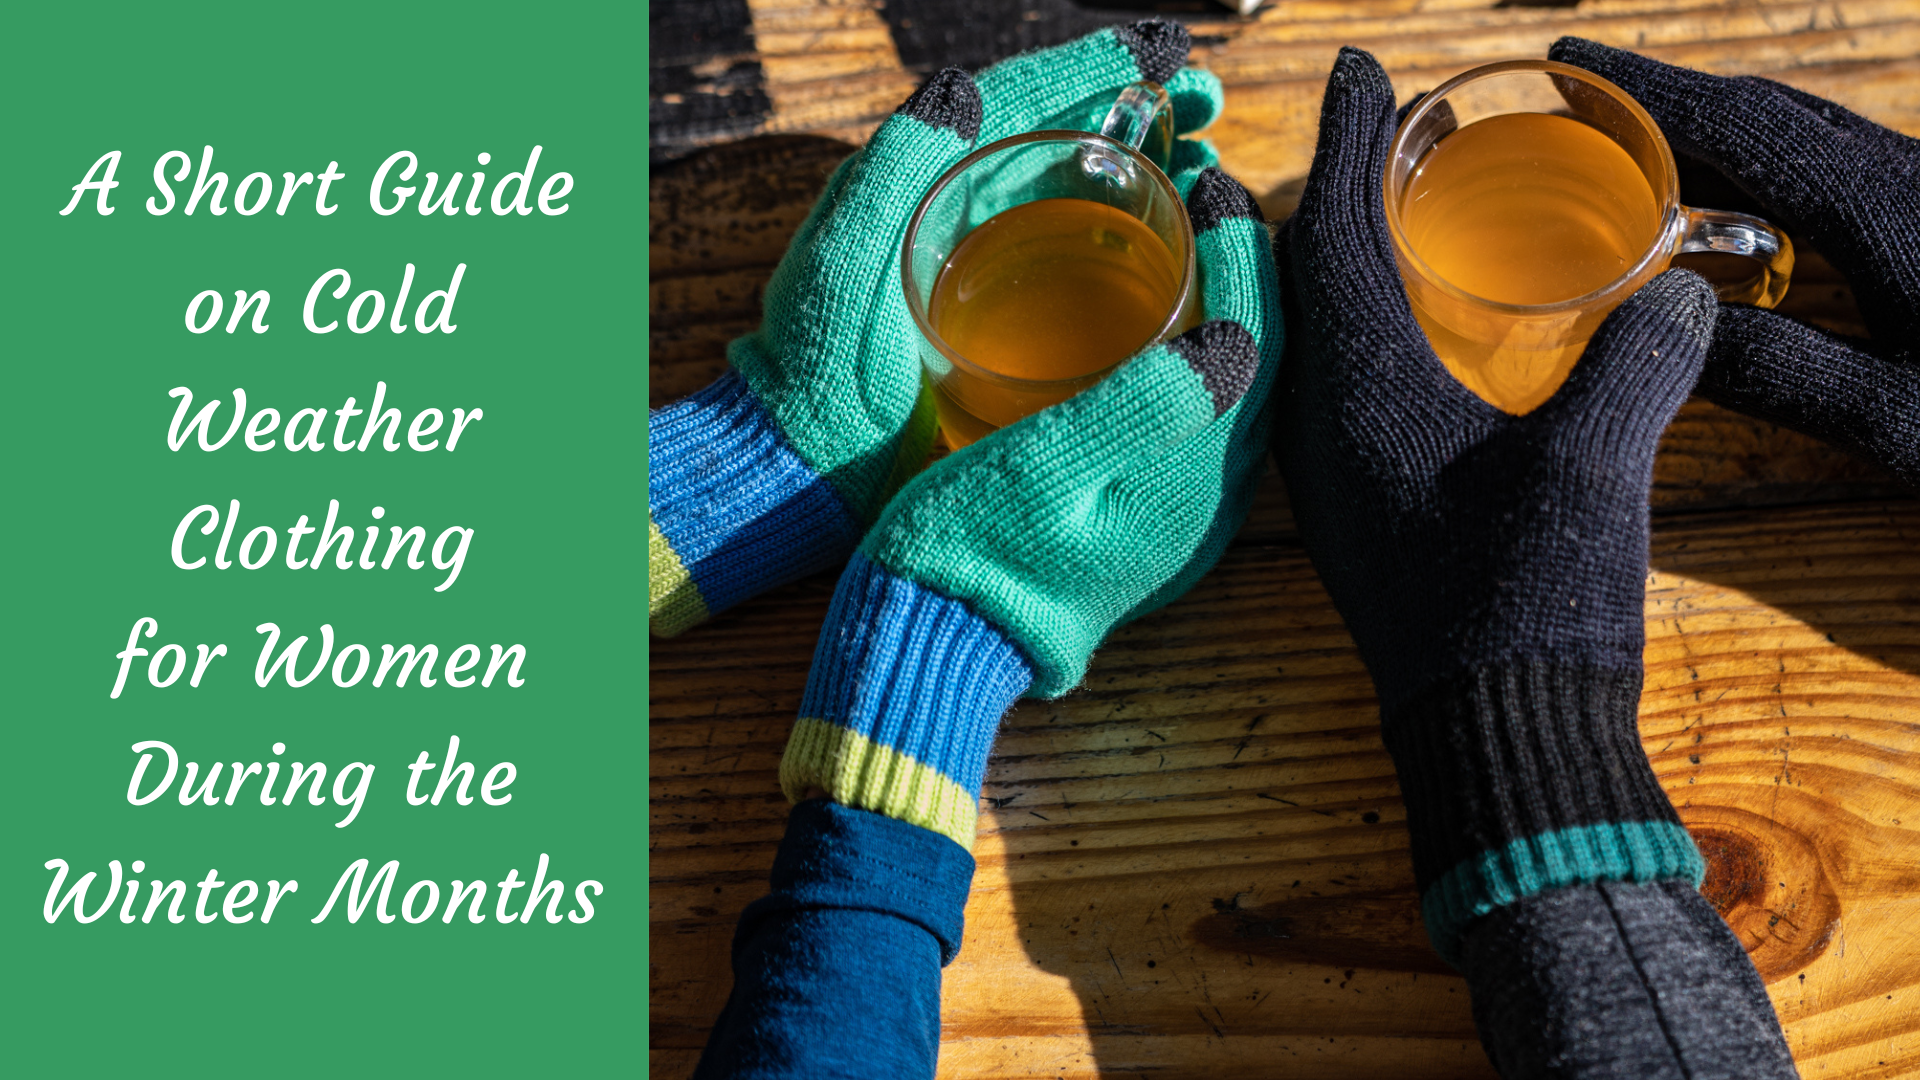 A Short Guide on Cold Weather Clothing for Women During the Winter